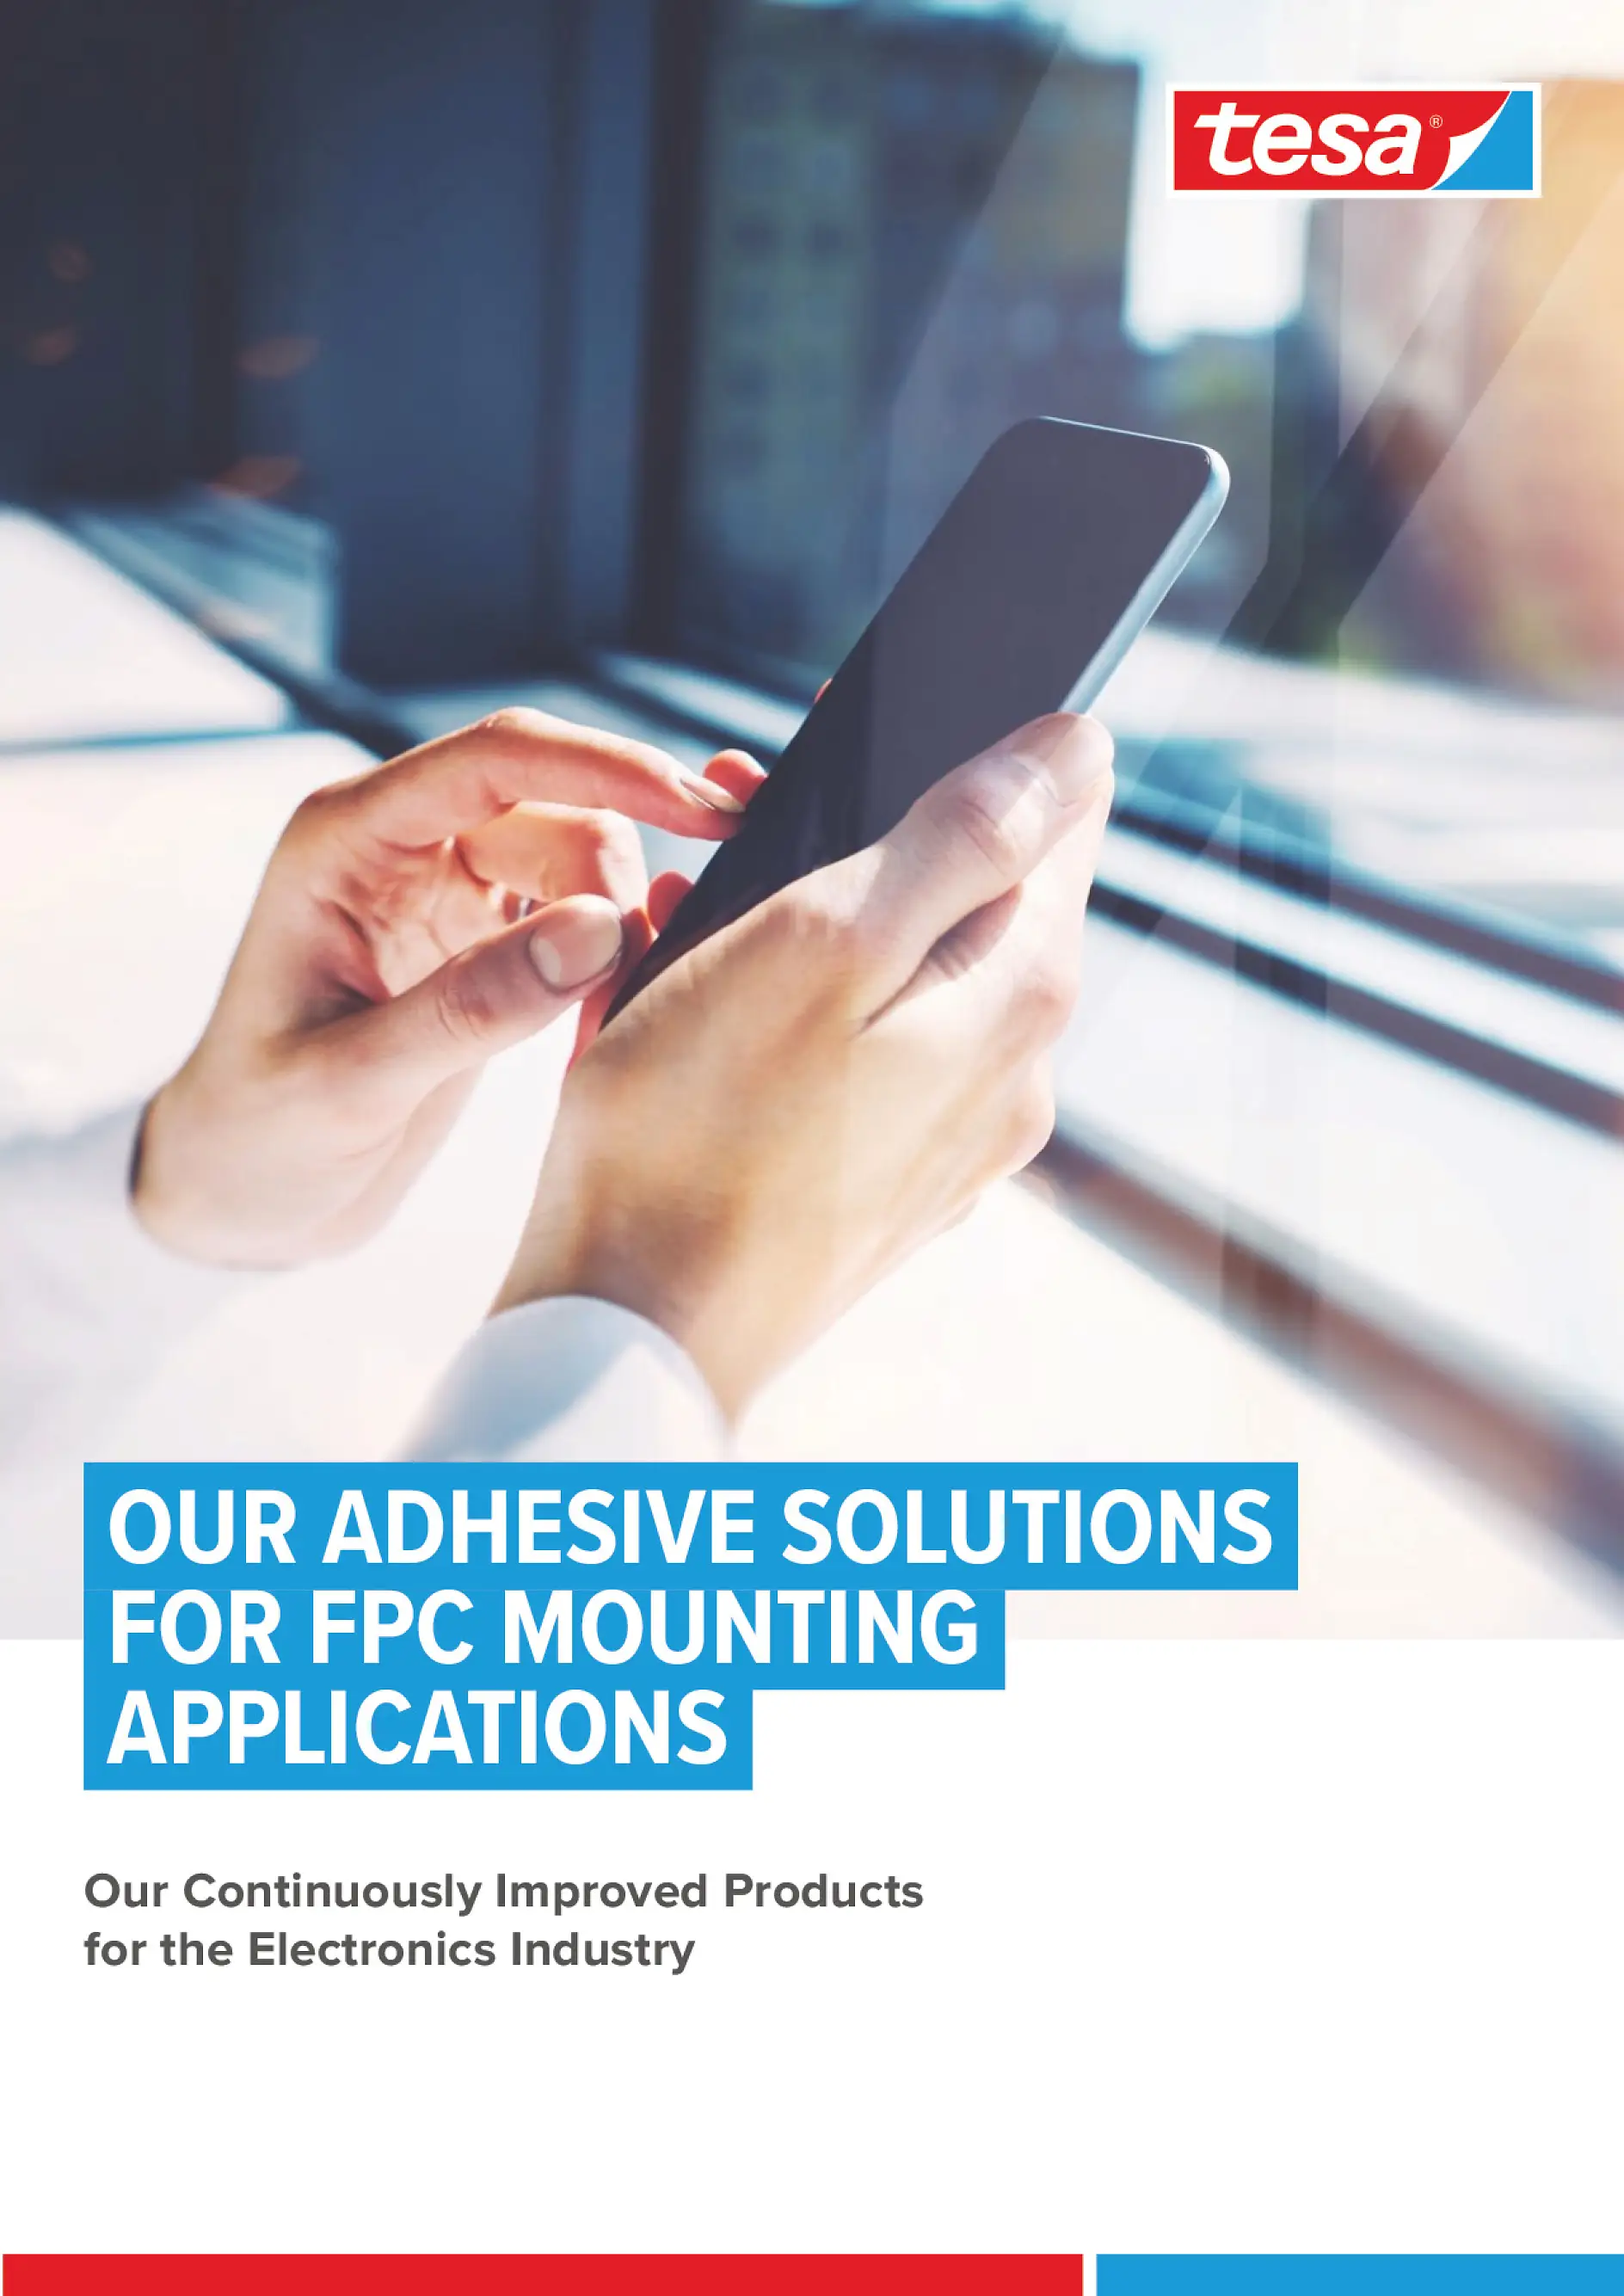 tesa Adhesive solutions for FPC Mounting applications